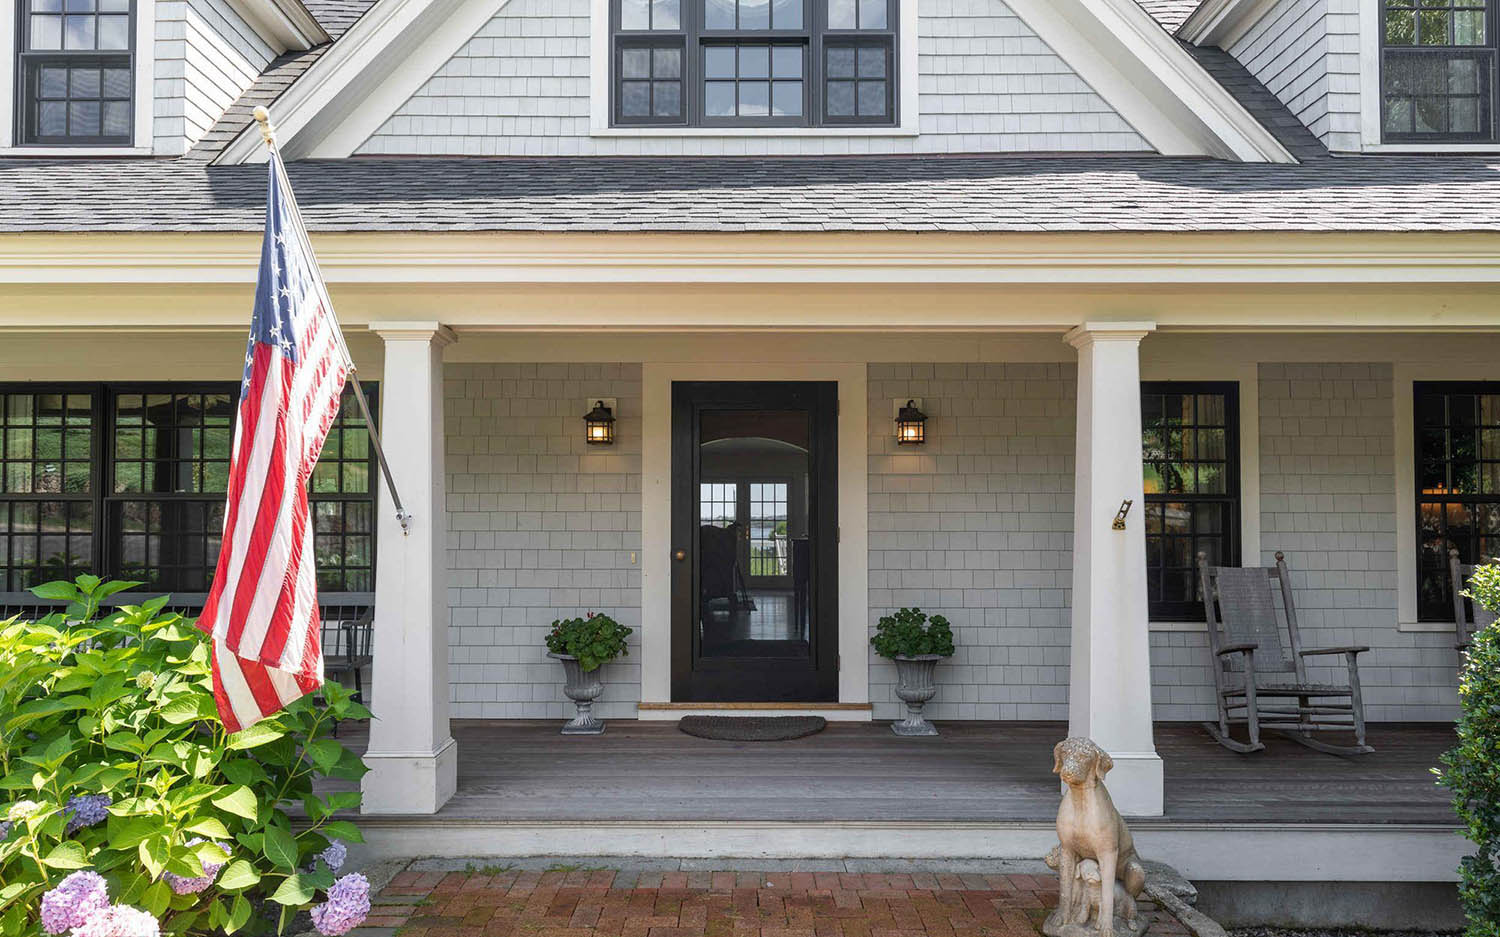 Gray house siding colors with black front door and white trim. White columns. Black framedwindows.